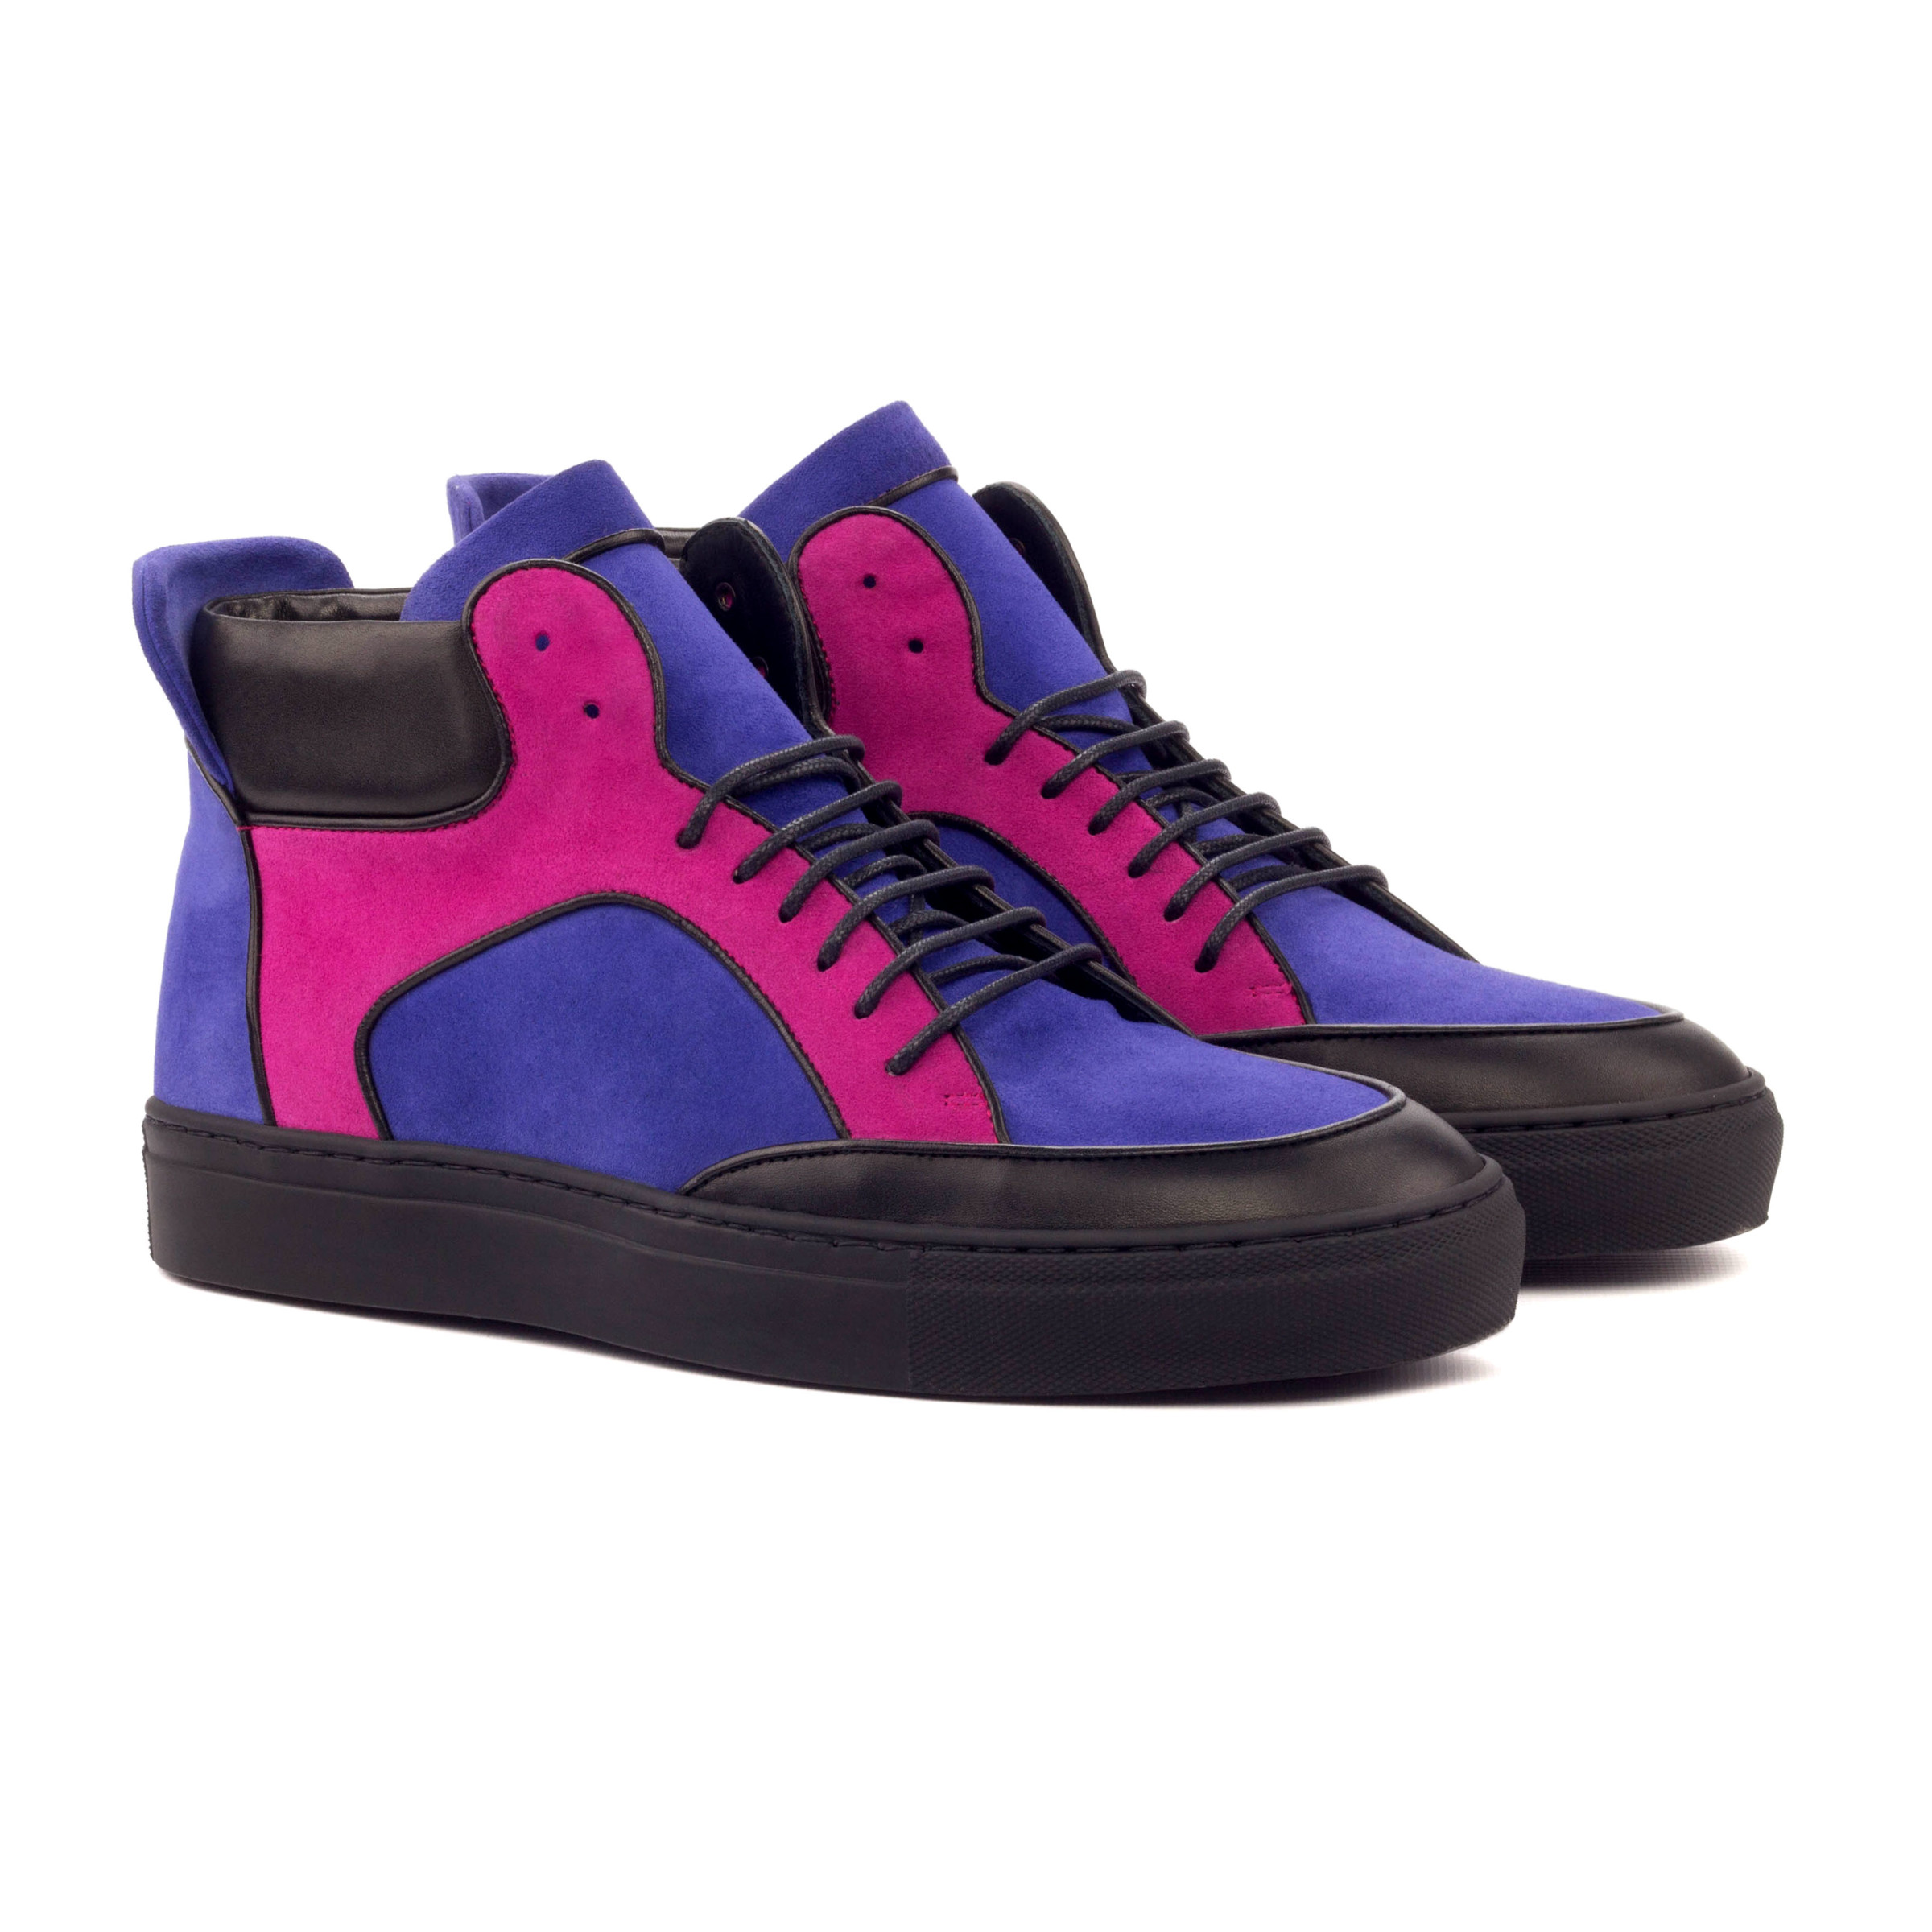 Purple and pink High Top Electric Vintage. Front side view of black calf leather, black box calf, purple kid suede, fuchsia kid suede, black painted calf leather sneaker style shoes with black soles on a white background